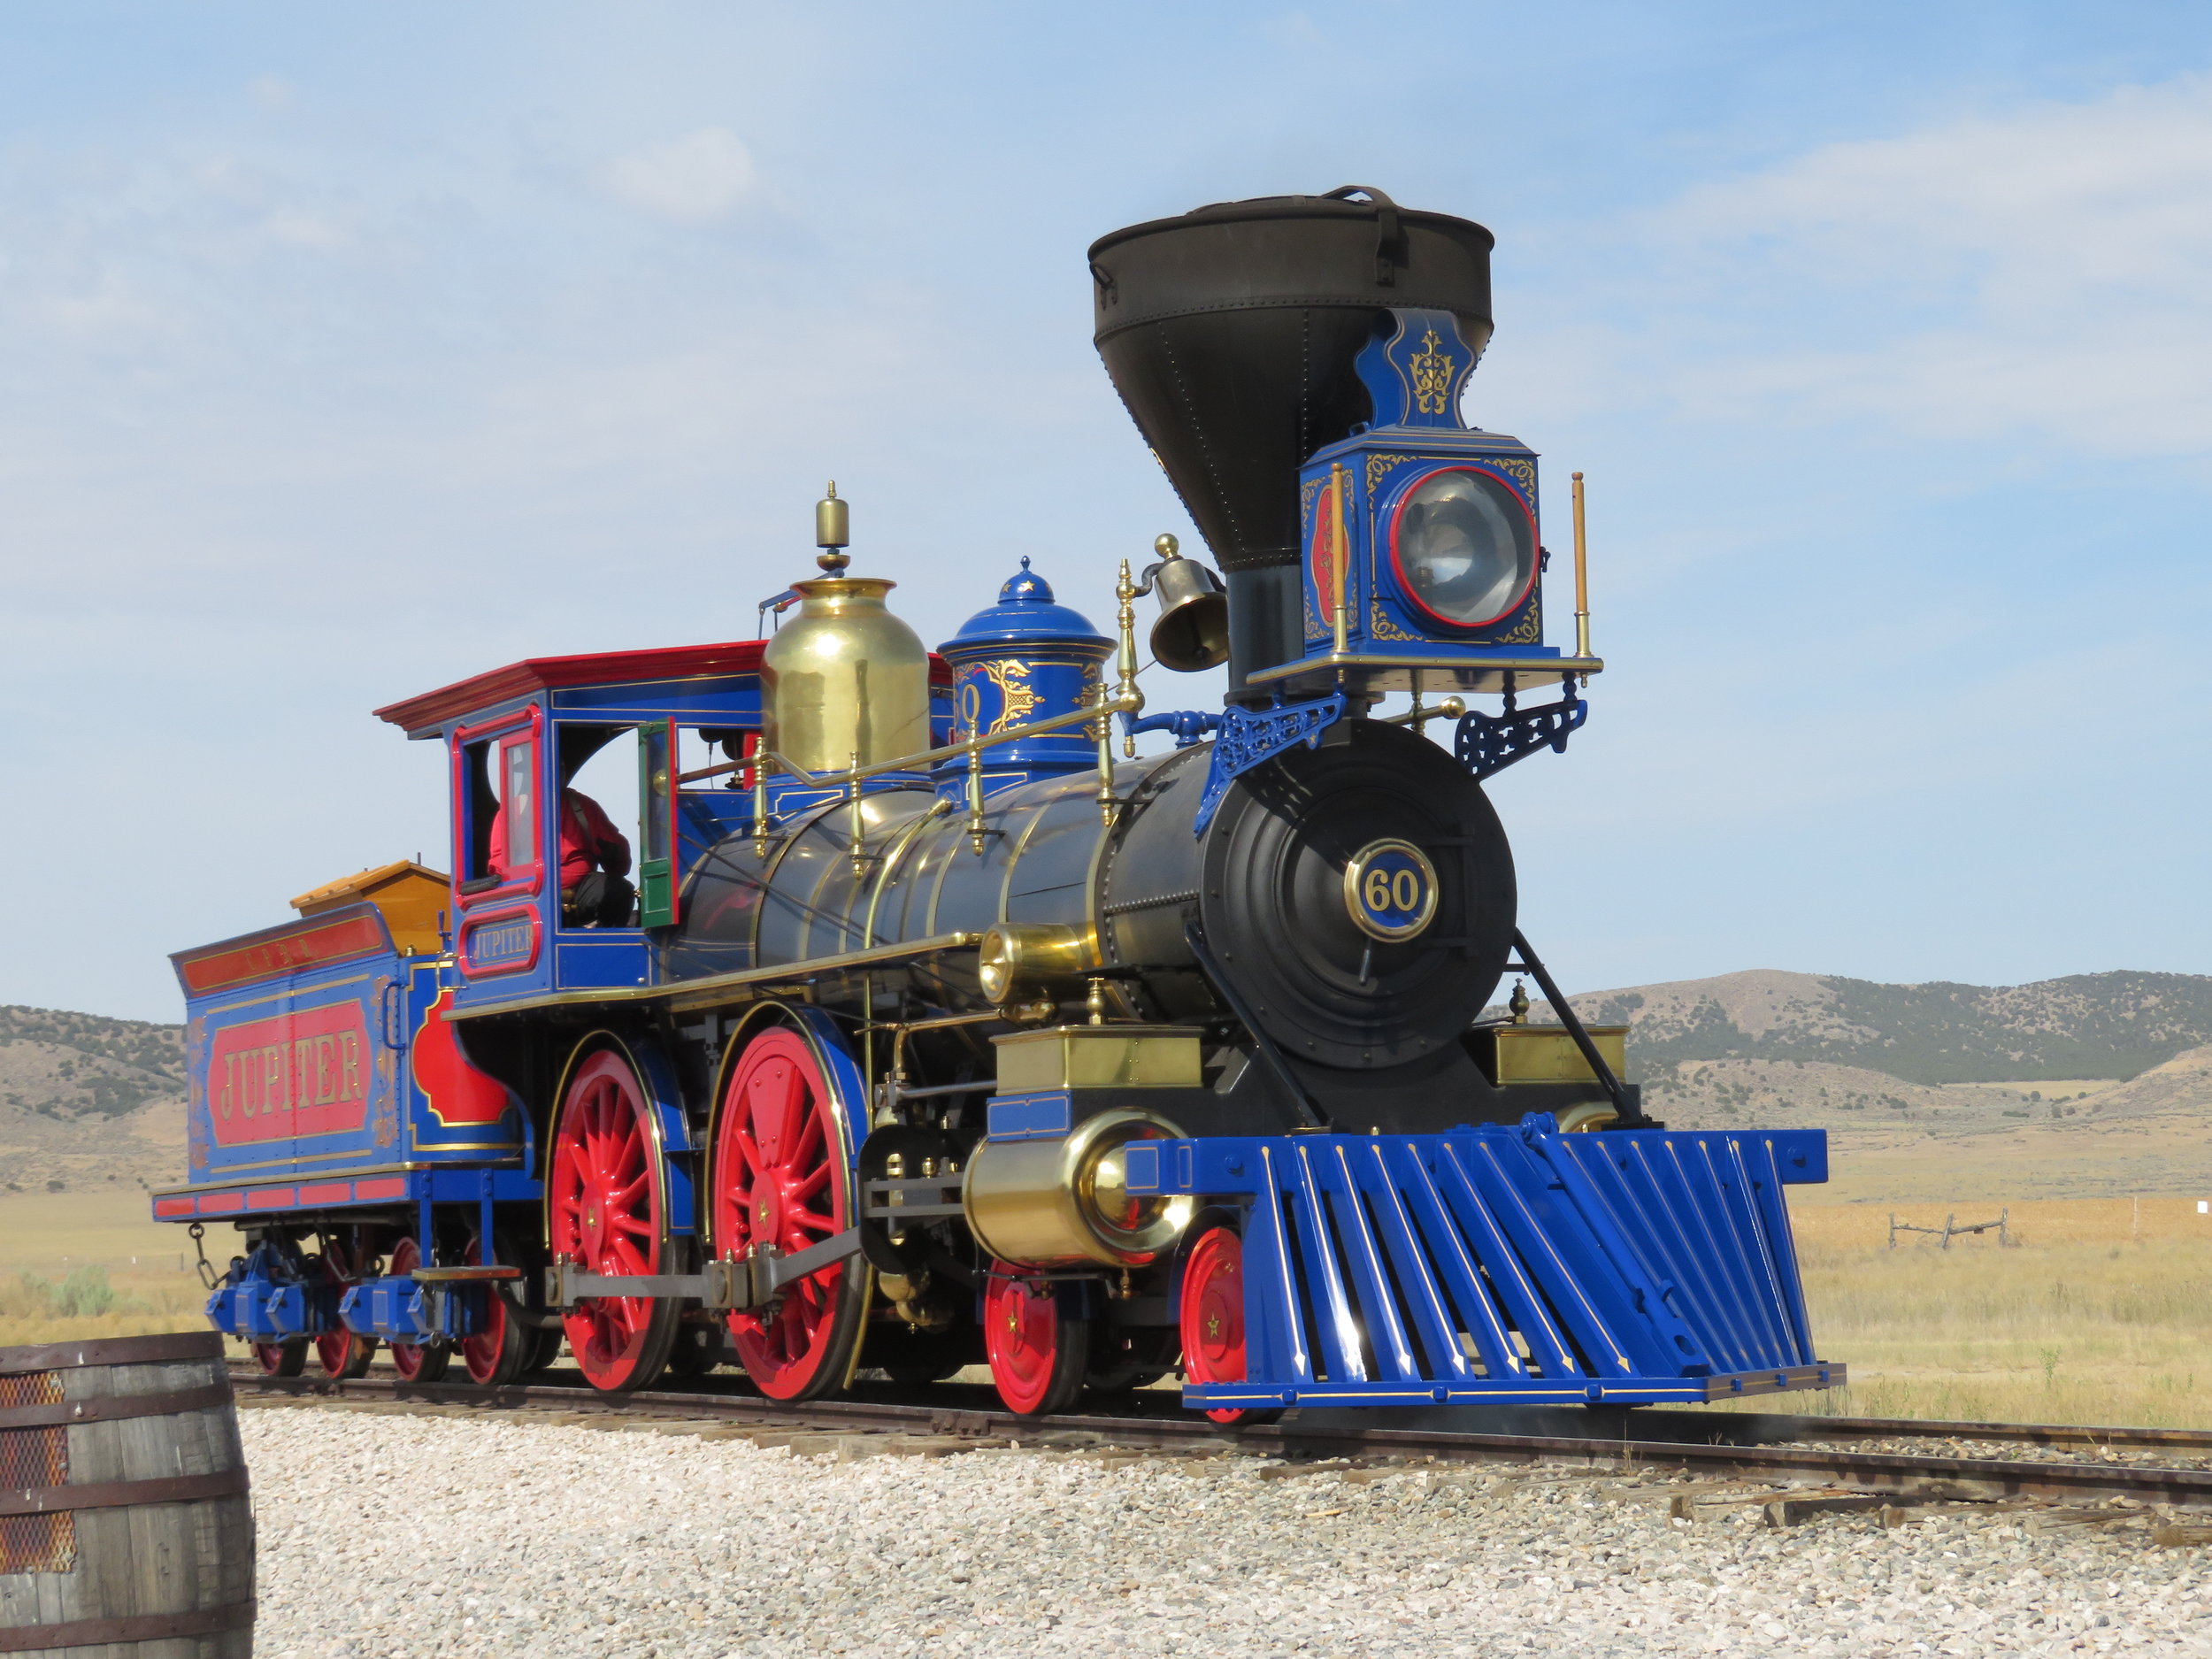 TTH - Golden Spike National Historic Site — Just a Little Further